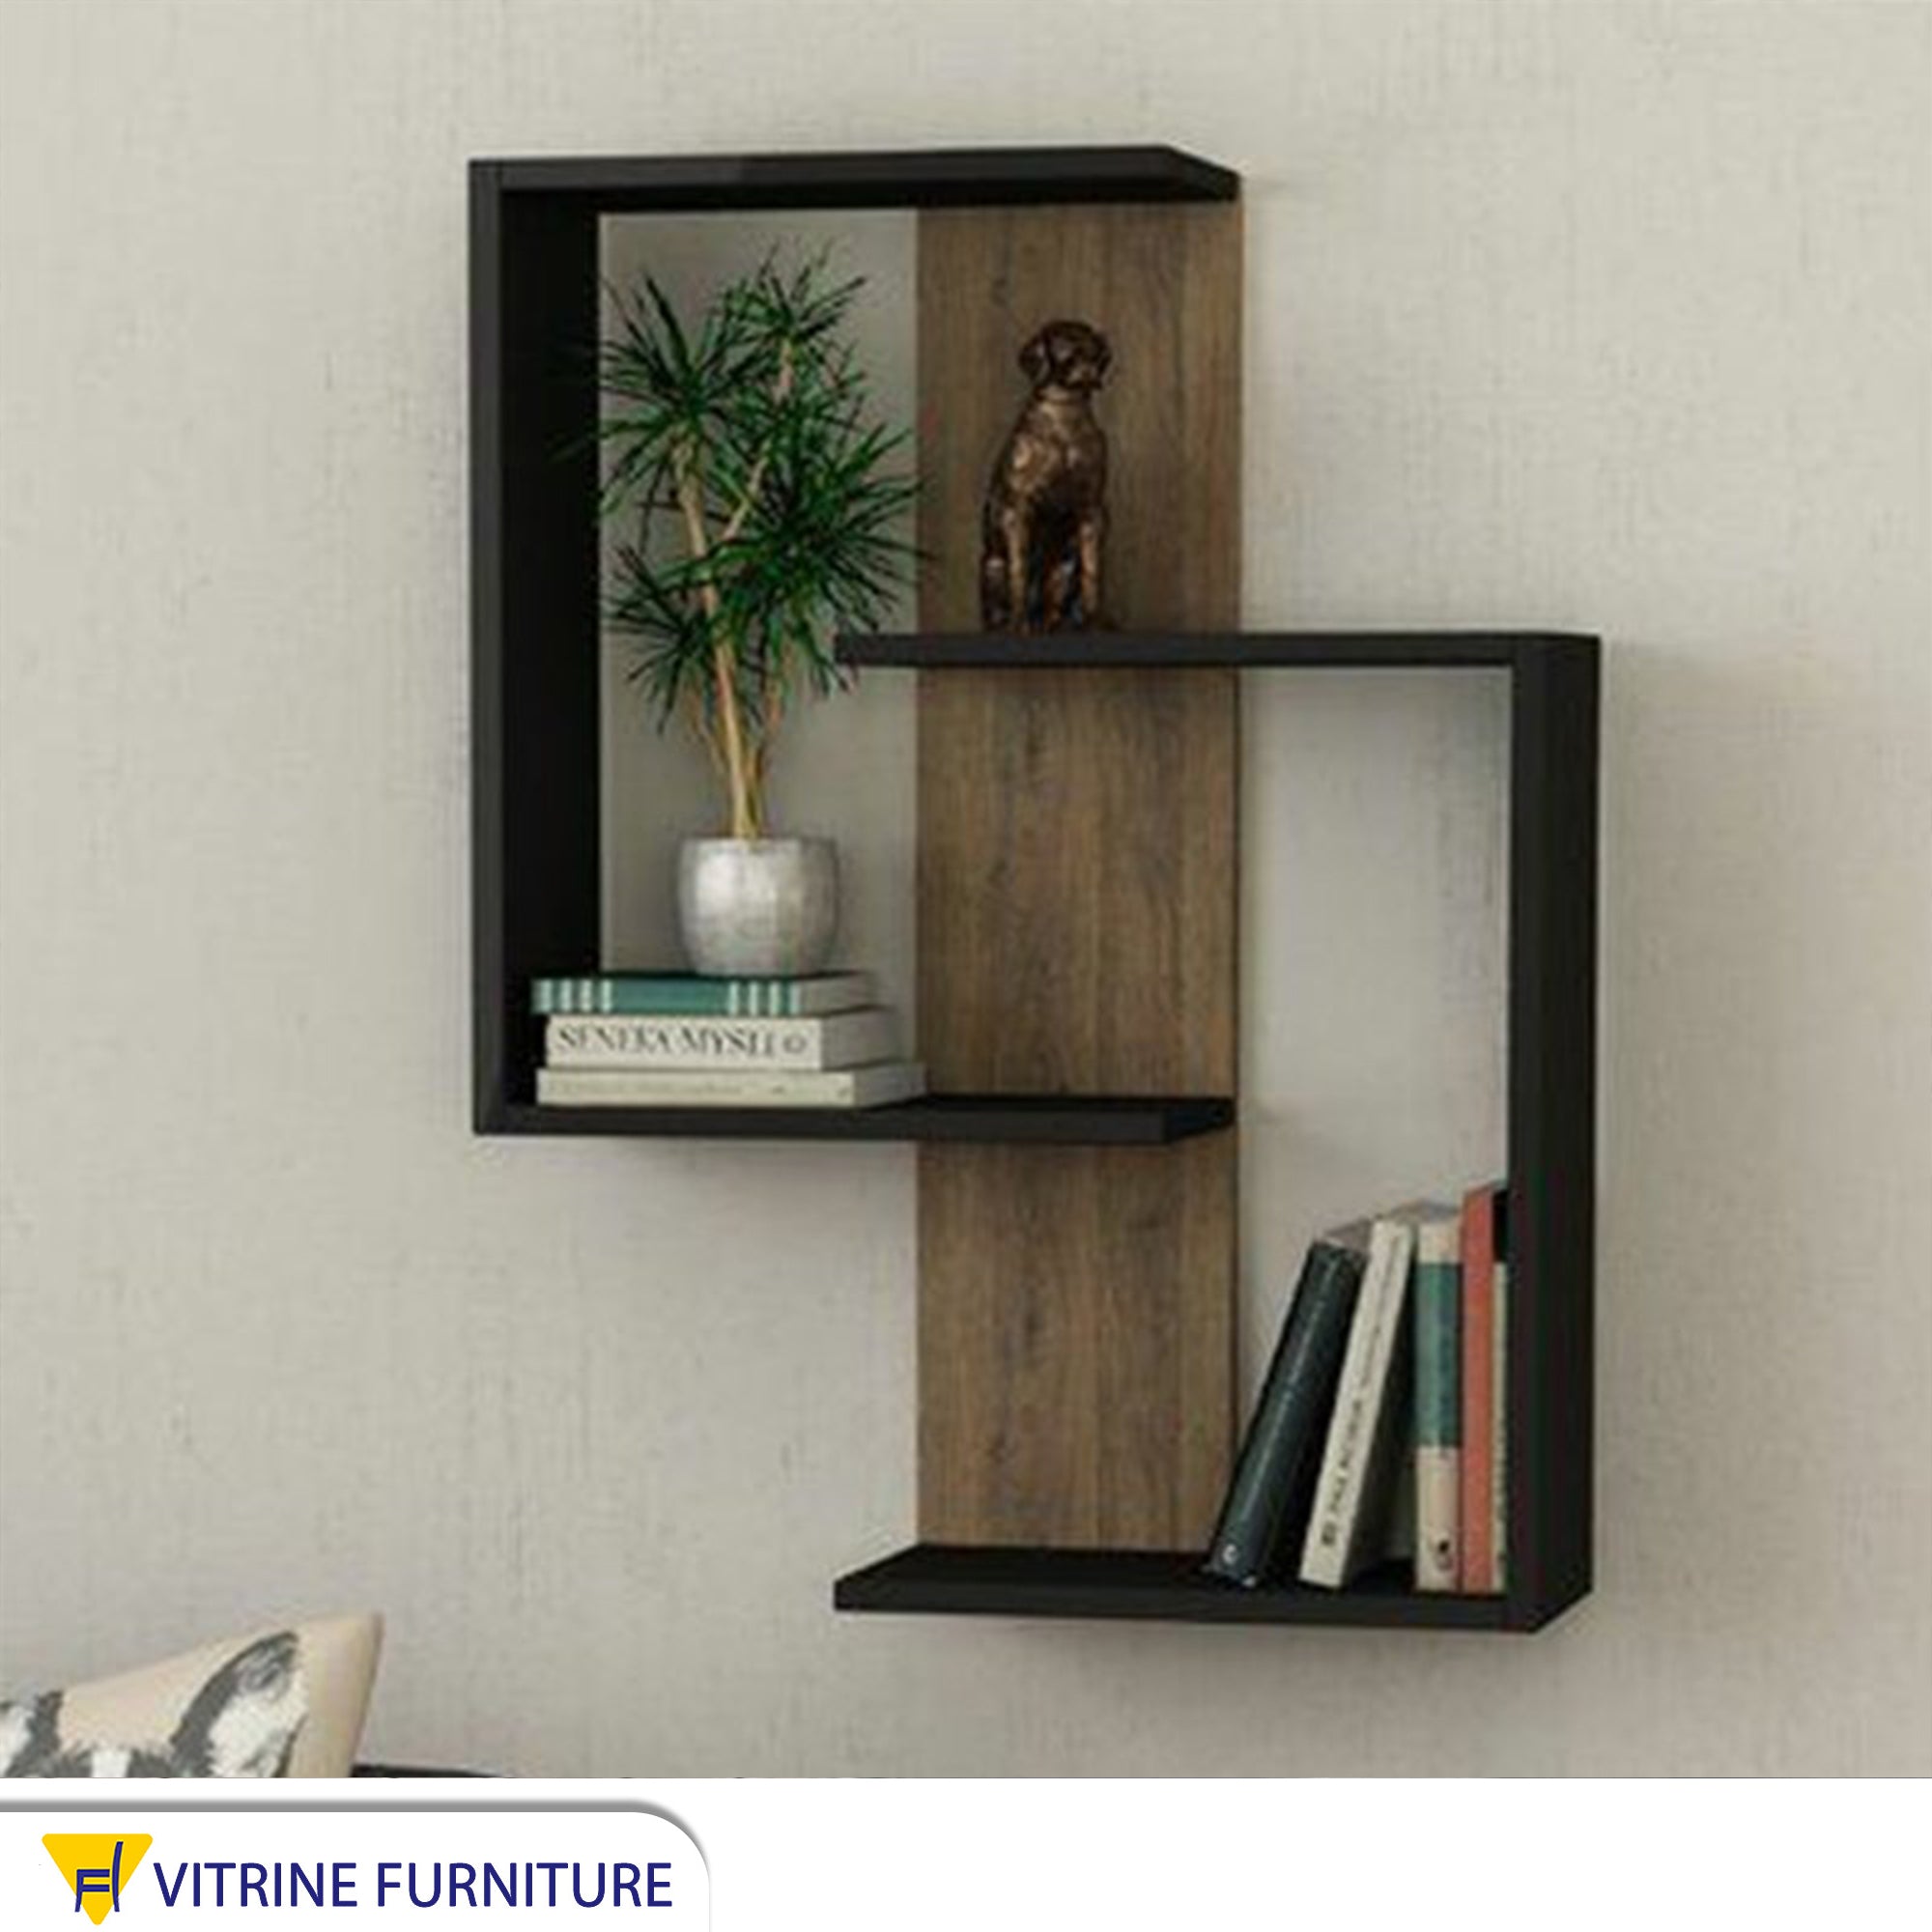 A decorative piece for a black and beige wall shelf